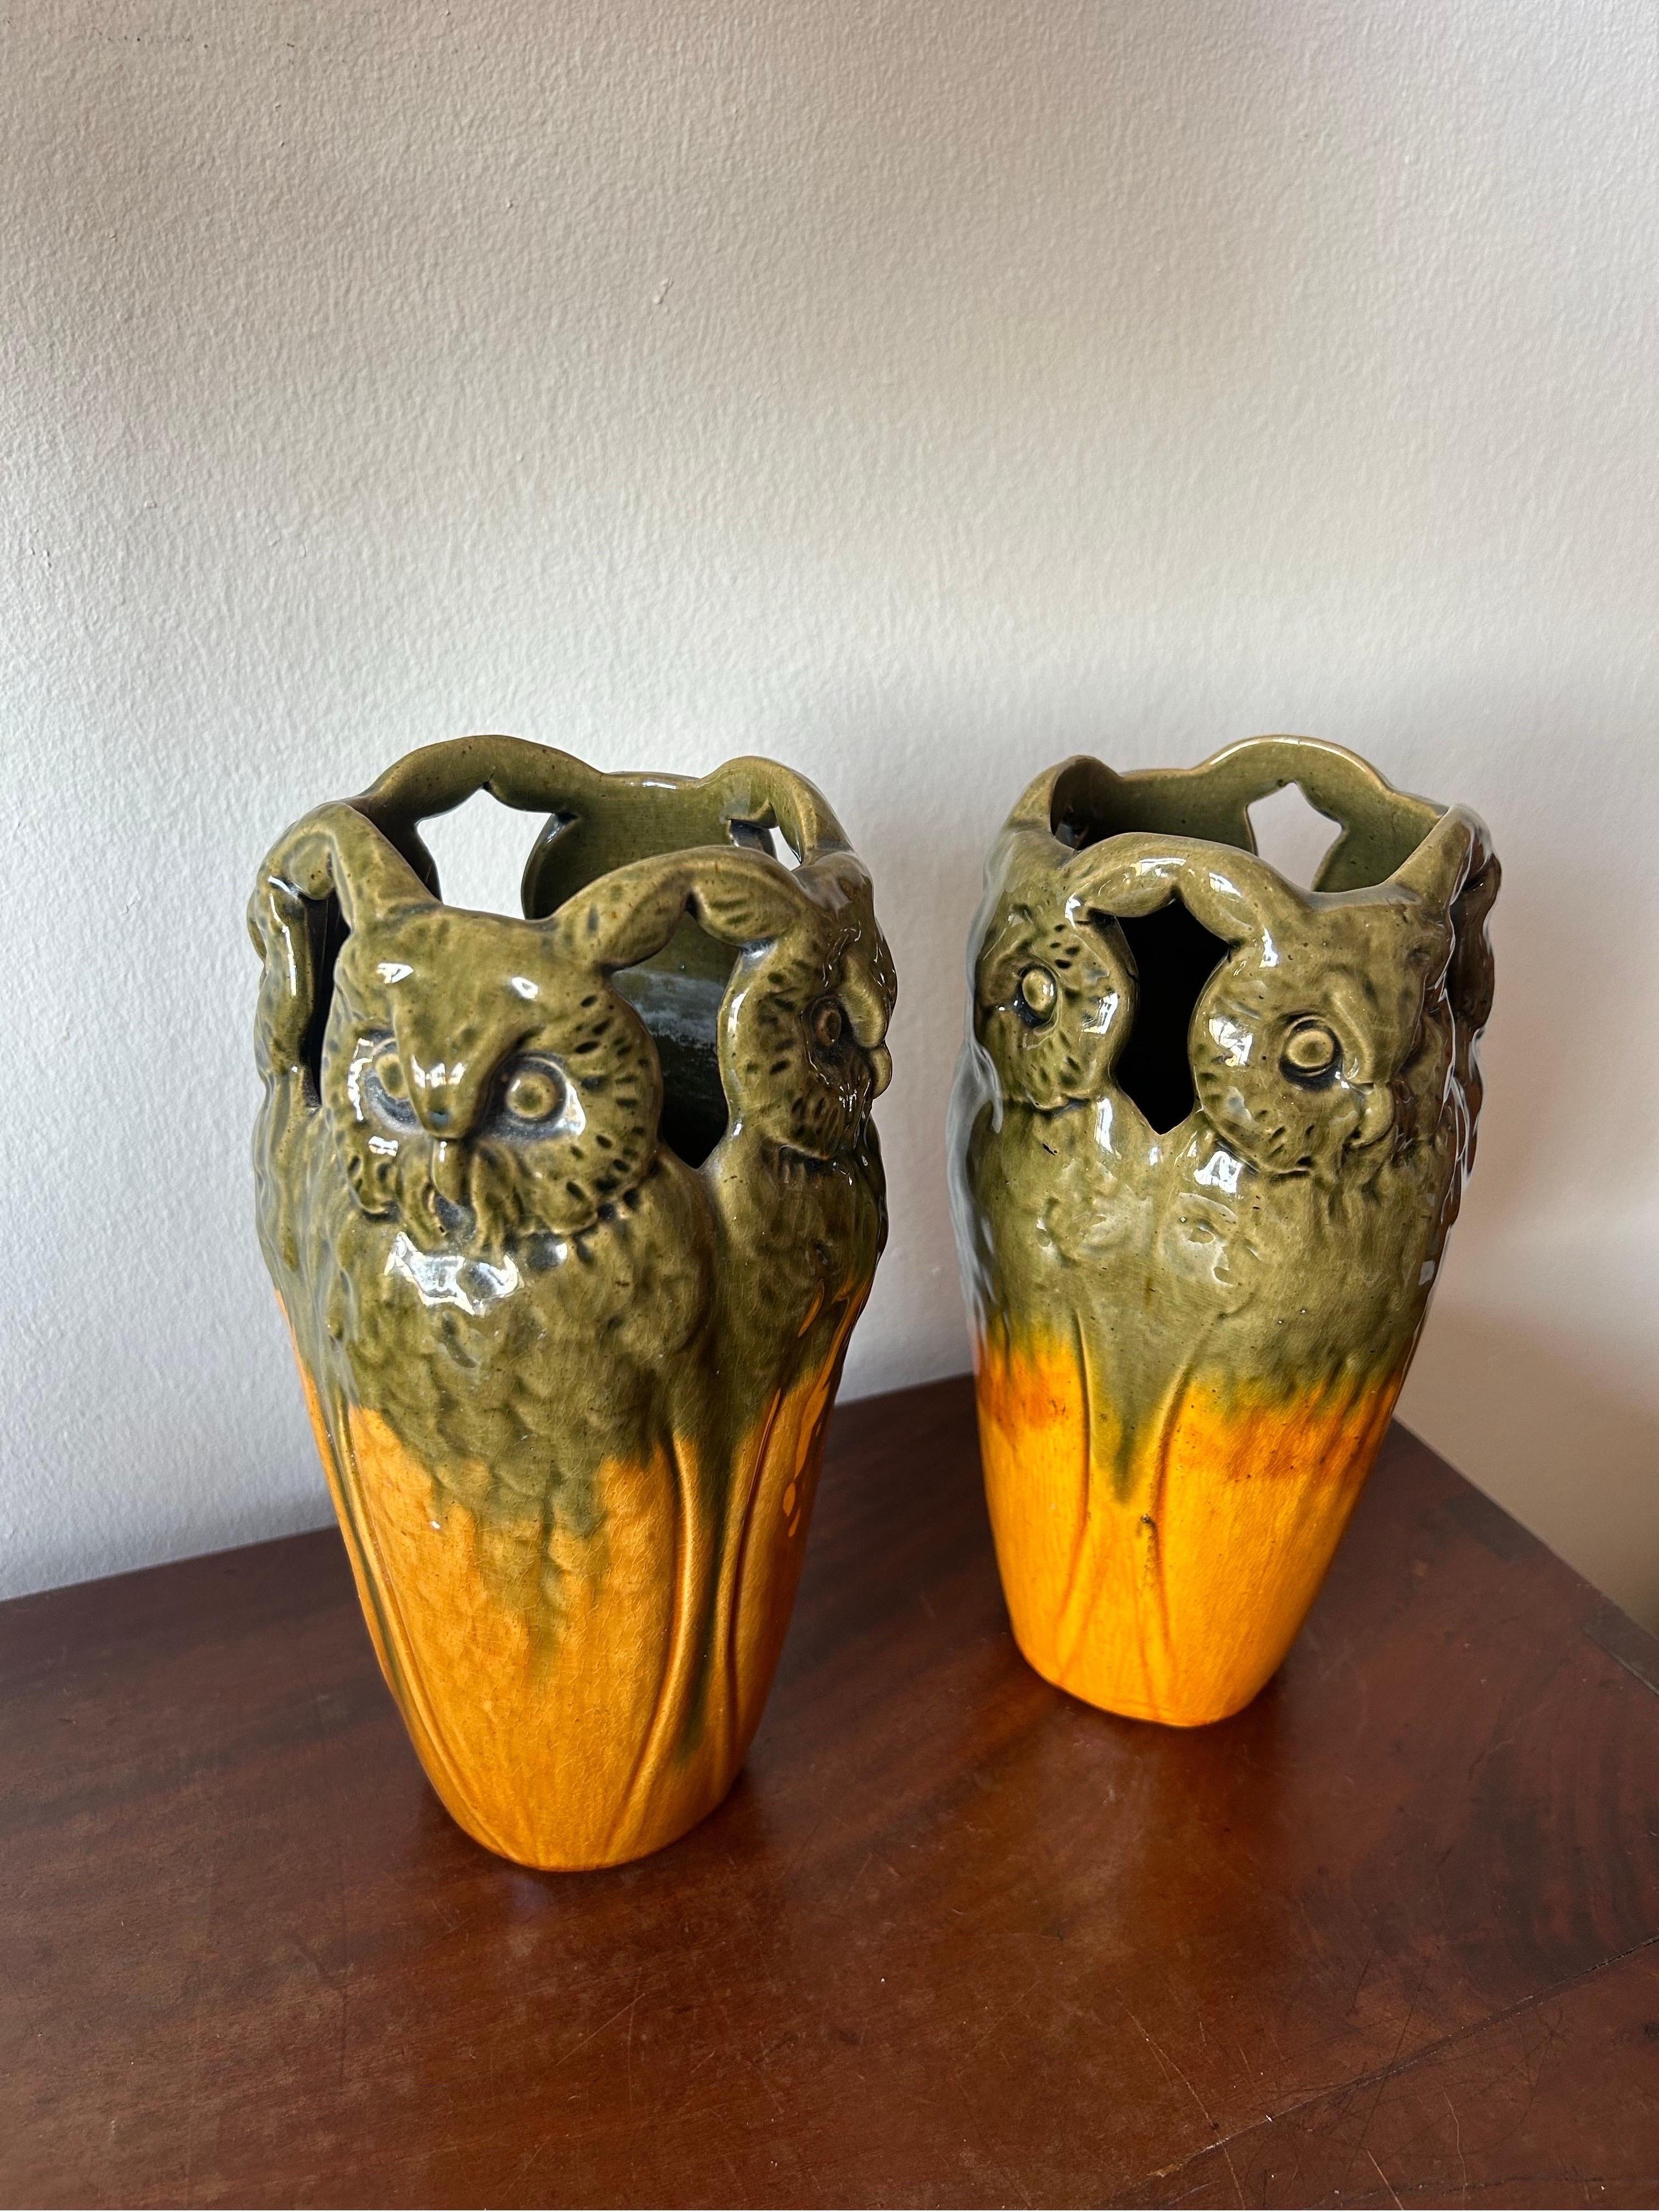 Rare pair of Michael Andersen ceramic vases with four owls as decoration on each vase, both of the vases have the classic blymajolika glaze which Michael Andersen is well known for. These vases are made in the early years of the workshop and are